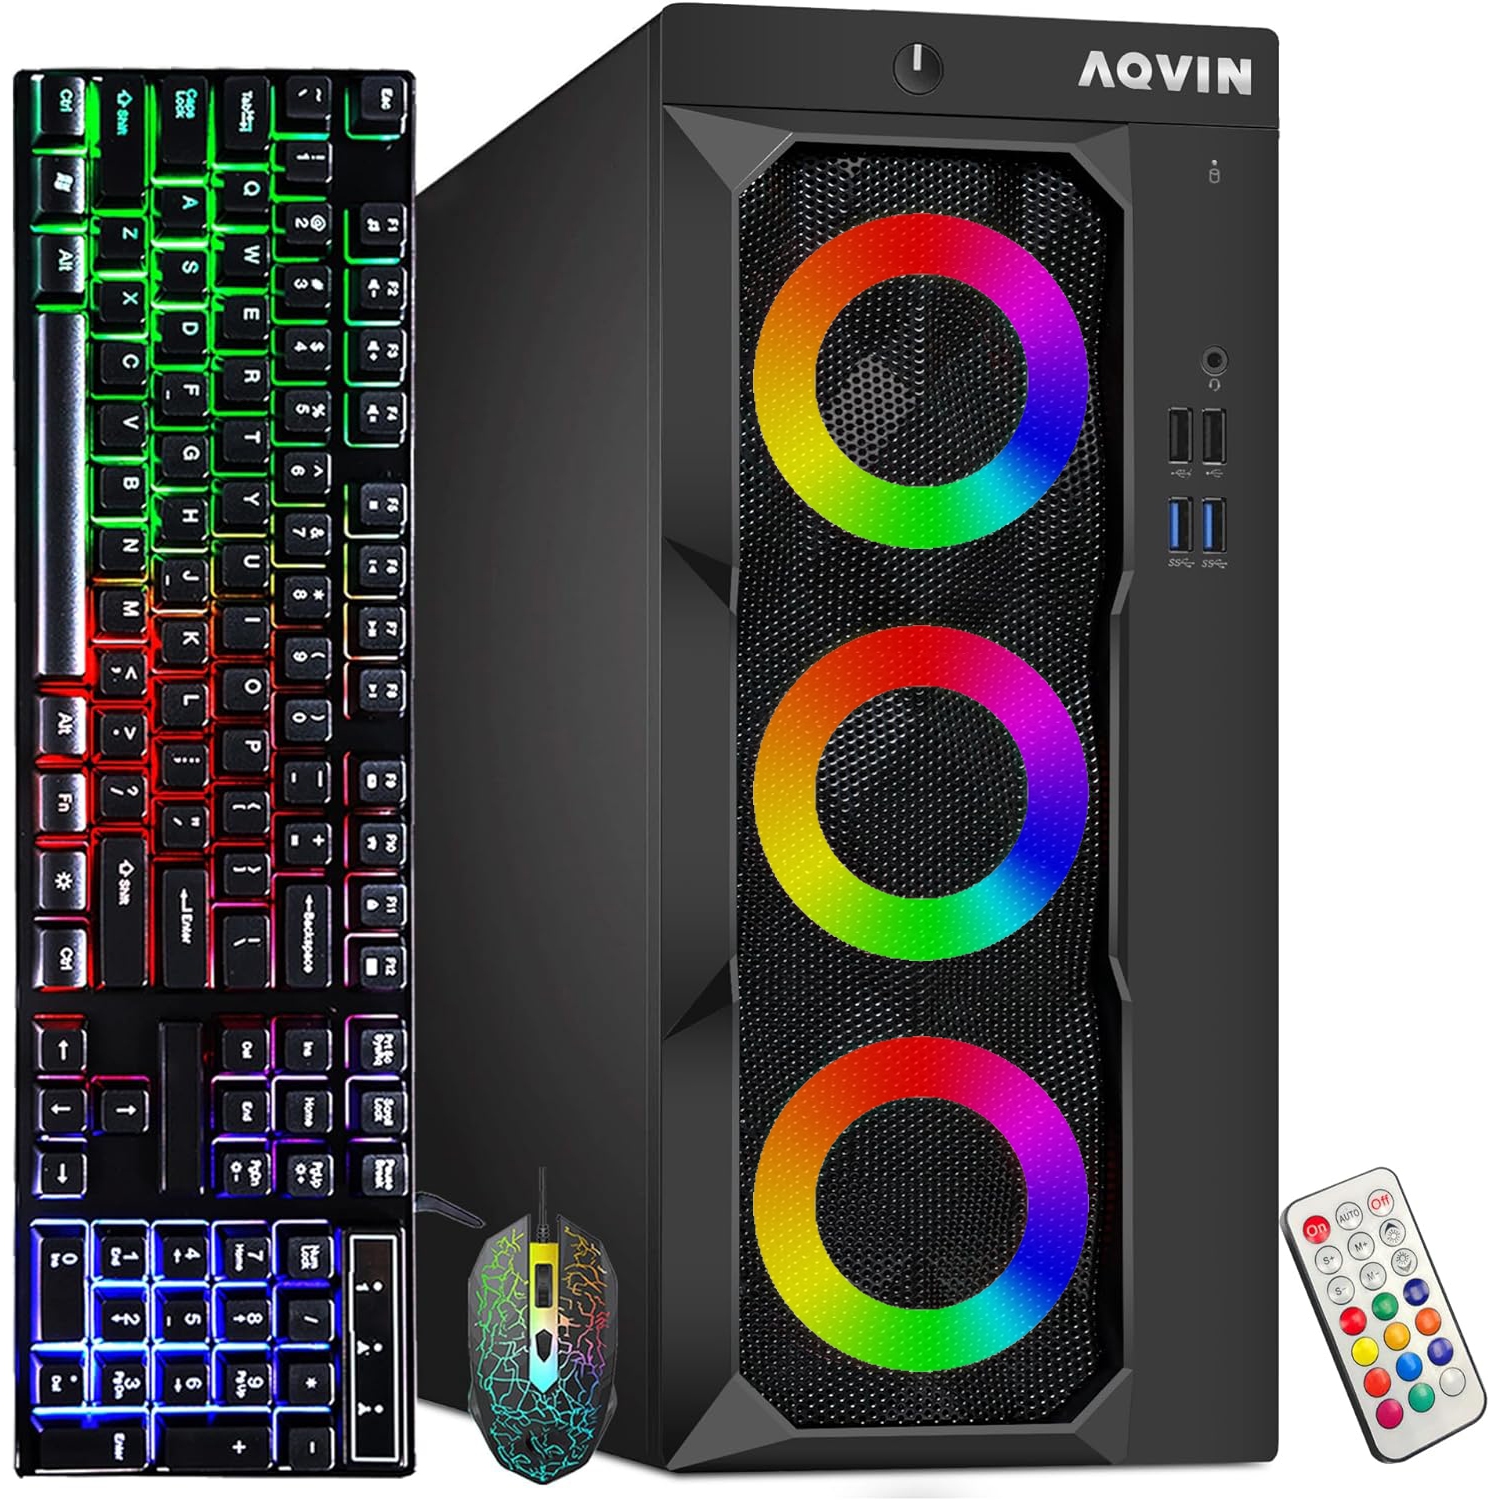 Refurbished (Excellent) - RGB Gaming PC LuminaRings Desktop Tower ~ Intel Core i7 up to 4.00GHz 32GB DDR4 RAM 2000GB (Fast Boot) SSD GeForce GTX 1630 DDR6 HDMI Windows 10 Pro WIFI